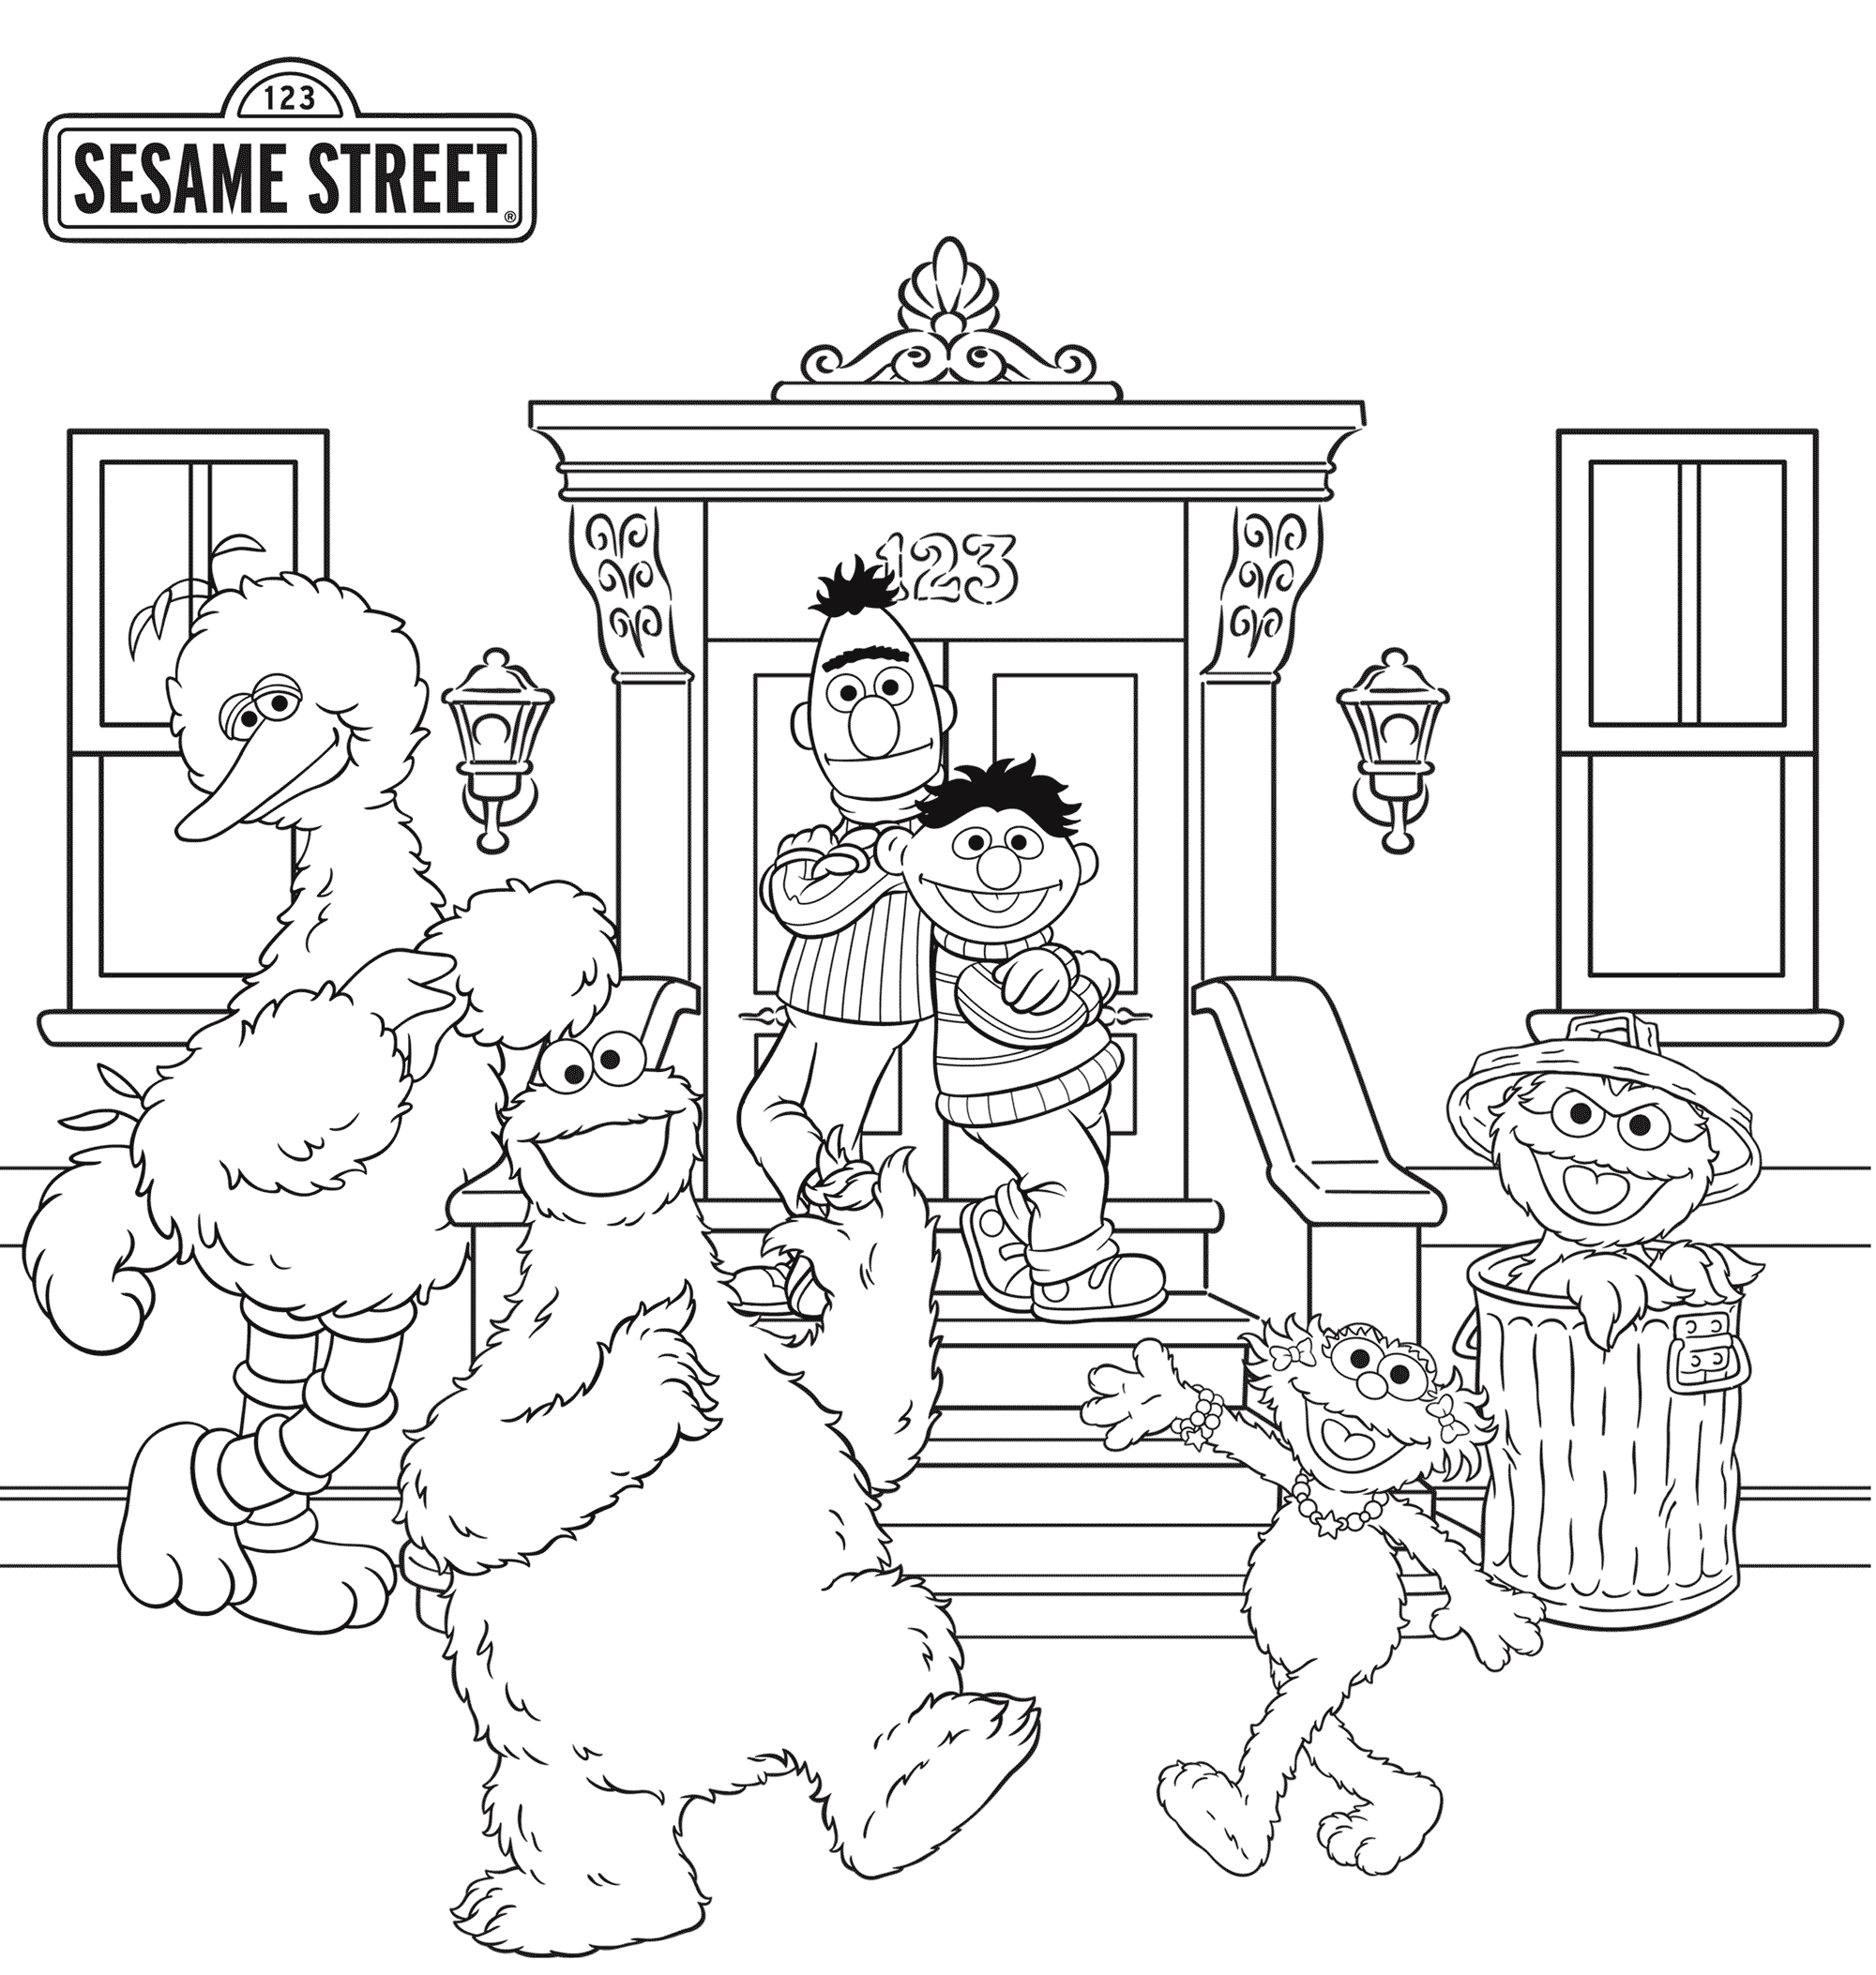 Sesame street coloring pages to print - ColoringStar